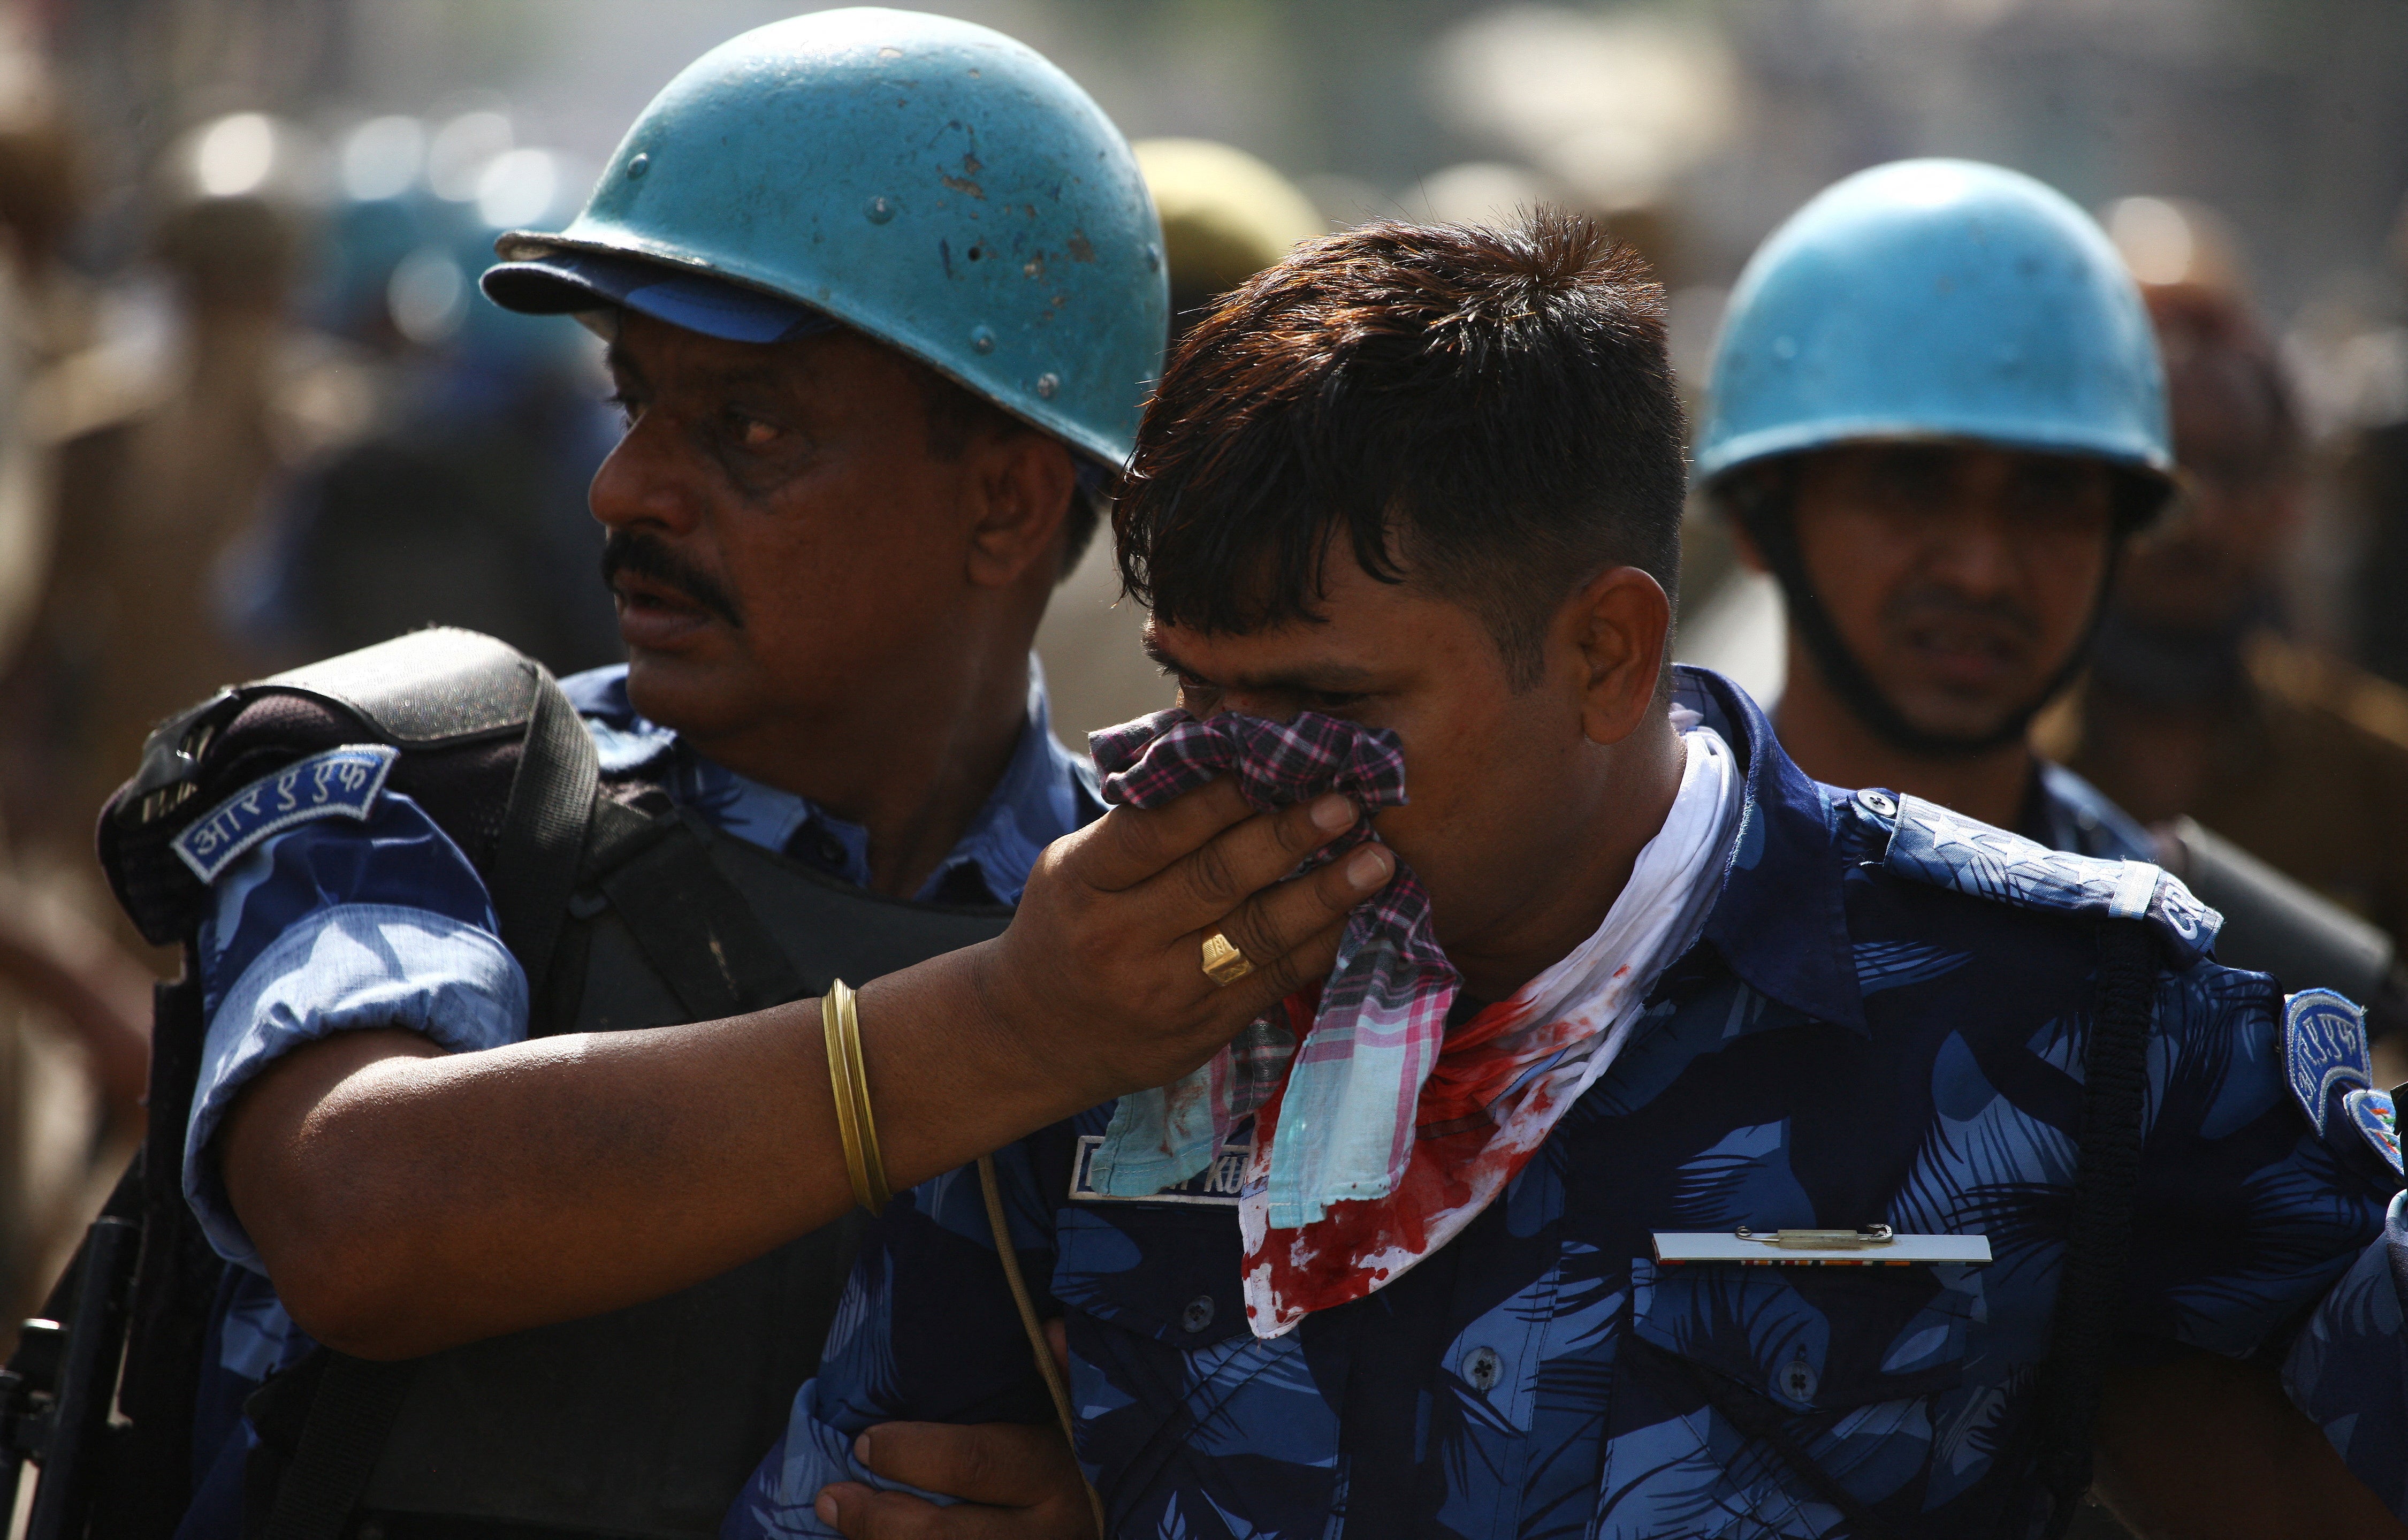 A policeman is being helped by his colleagues after he was injured during a protest against Nupur Sharma for her comments on Prophet Muhammad in India’s Prayagraj city